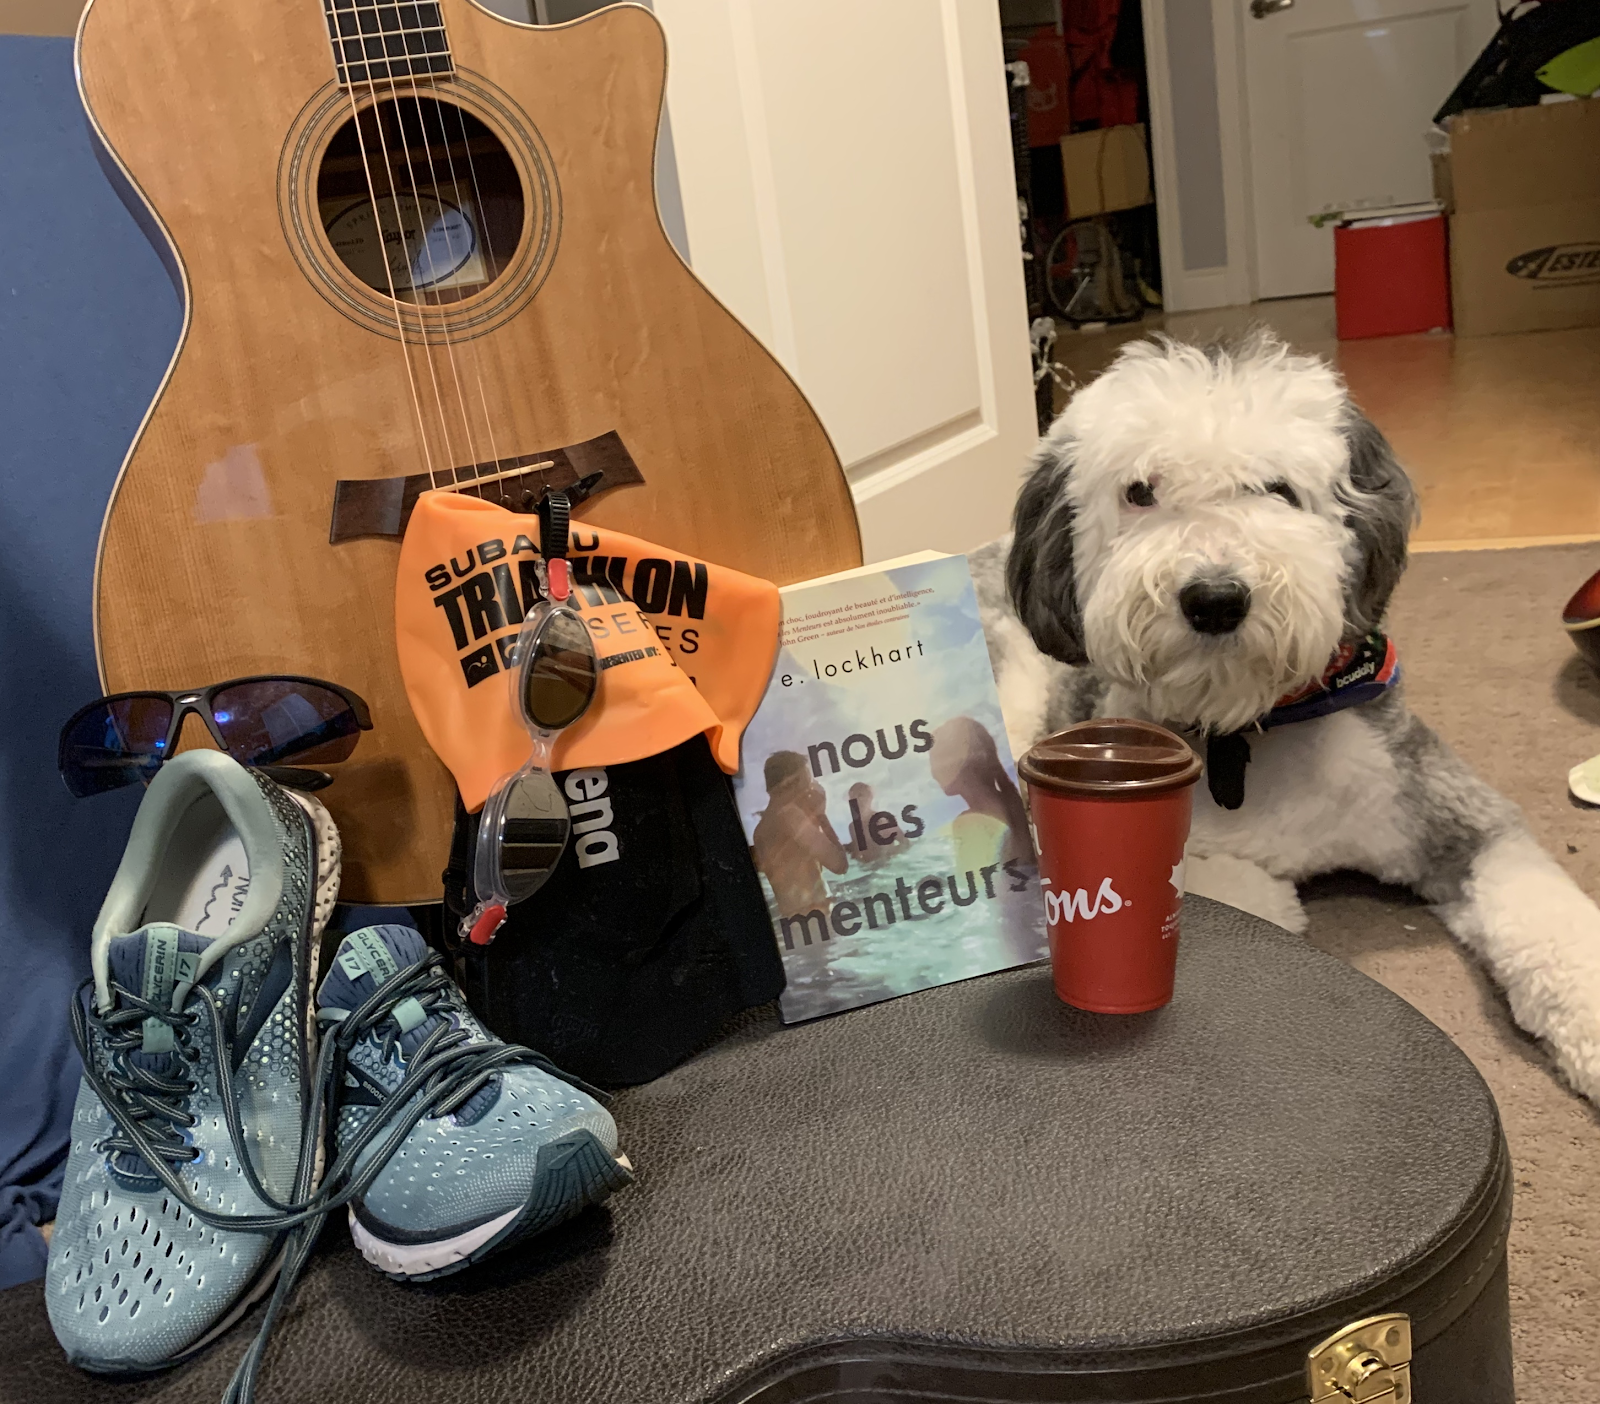 A collection of items, including running shoes, a guitar, a book, a cup of coffee and a dog.